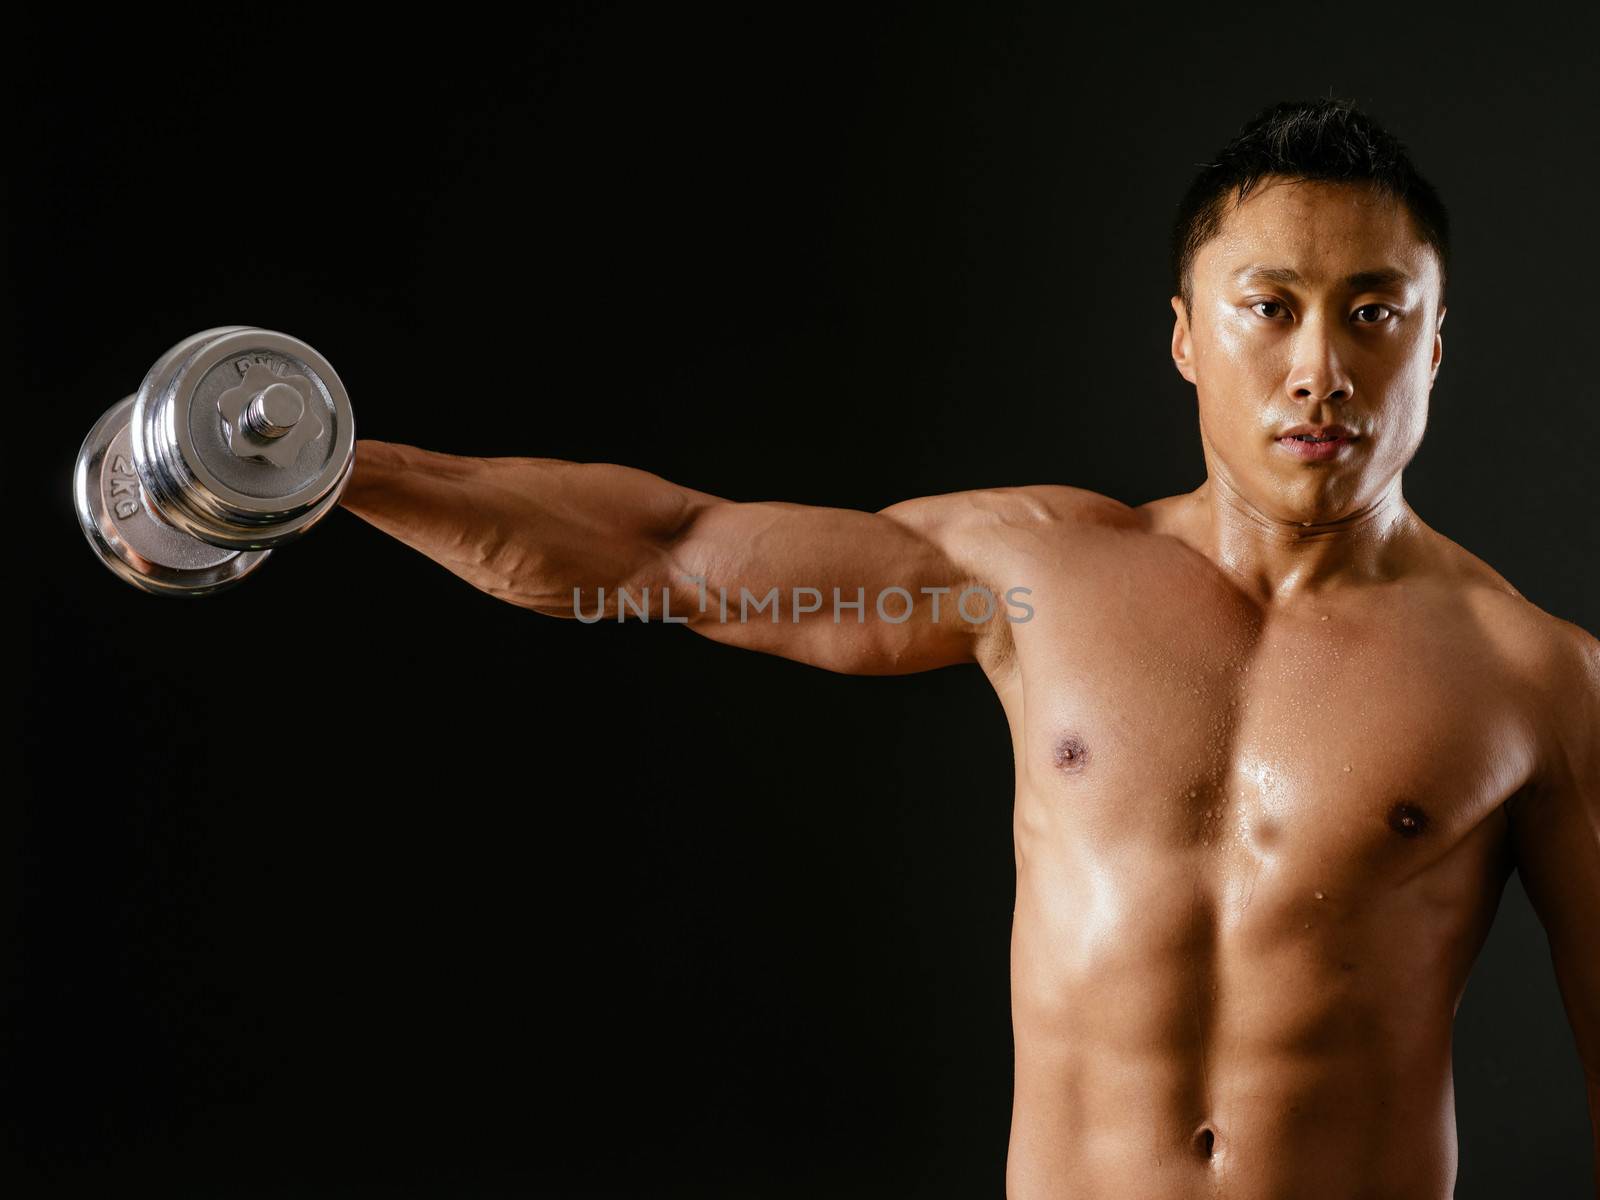 Photo of an Asian male exercising with dumbbells and doing shoulder flys or lateral flys over dark background.